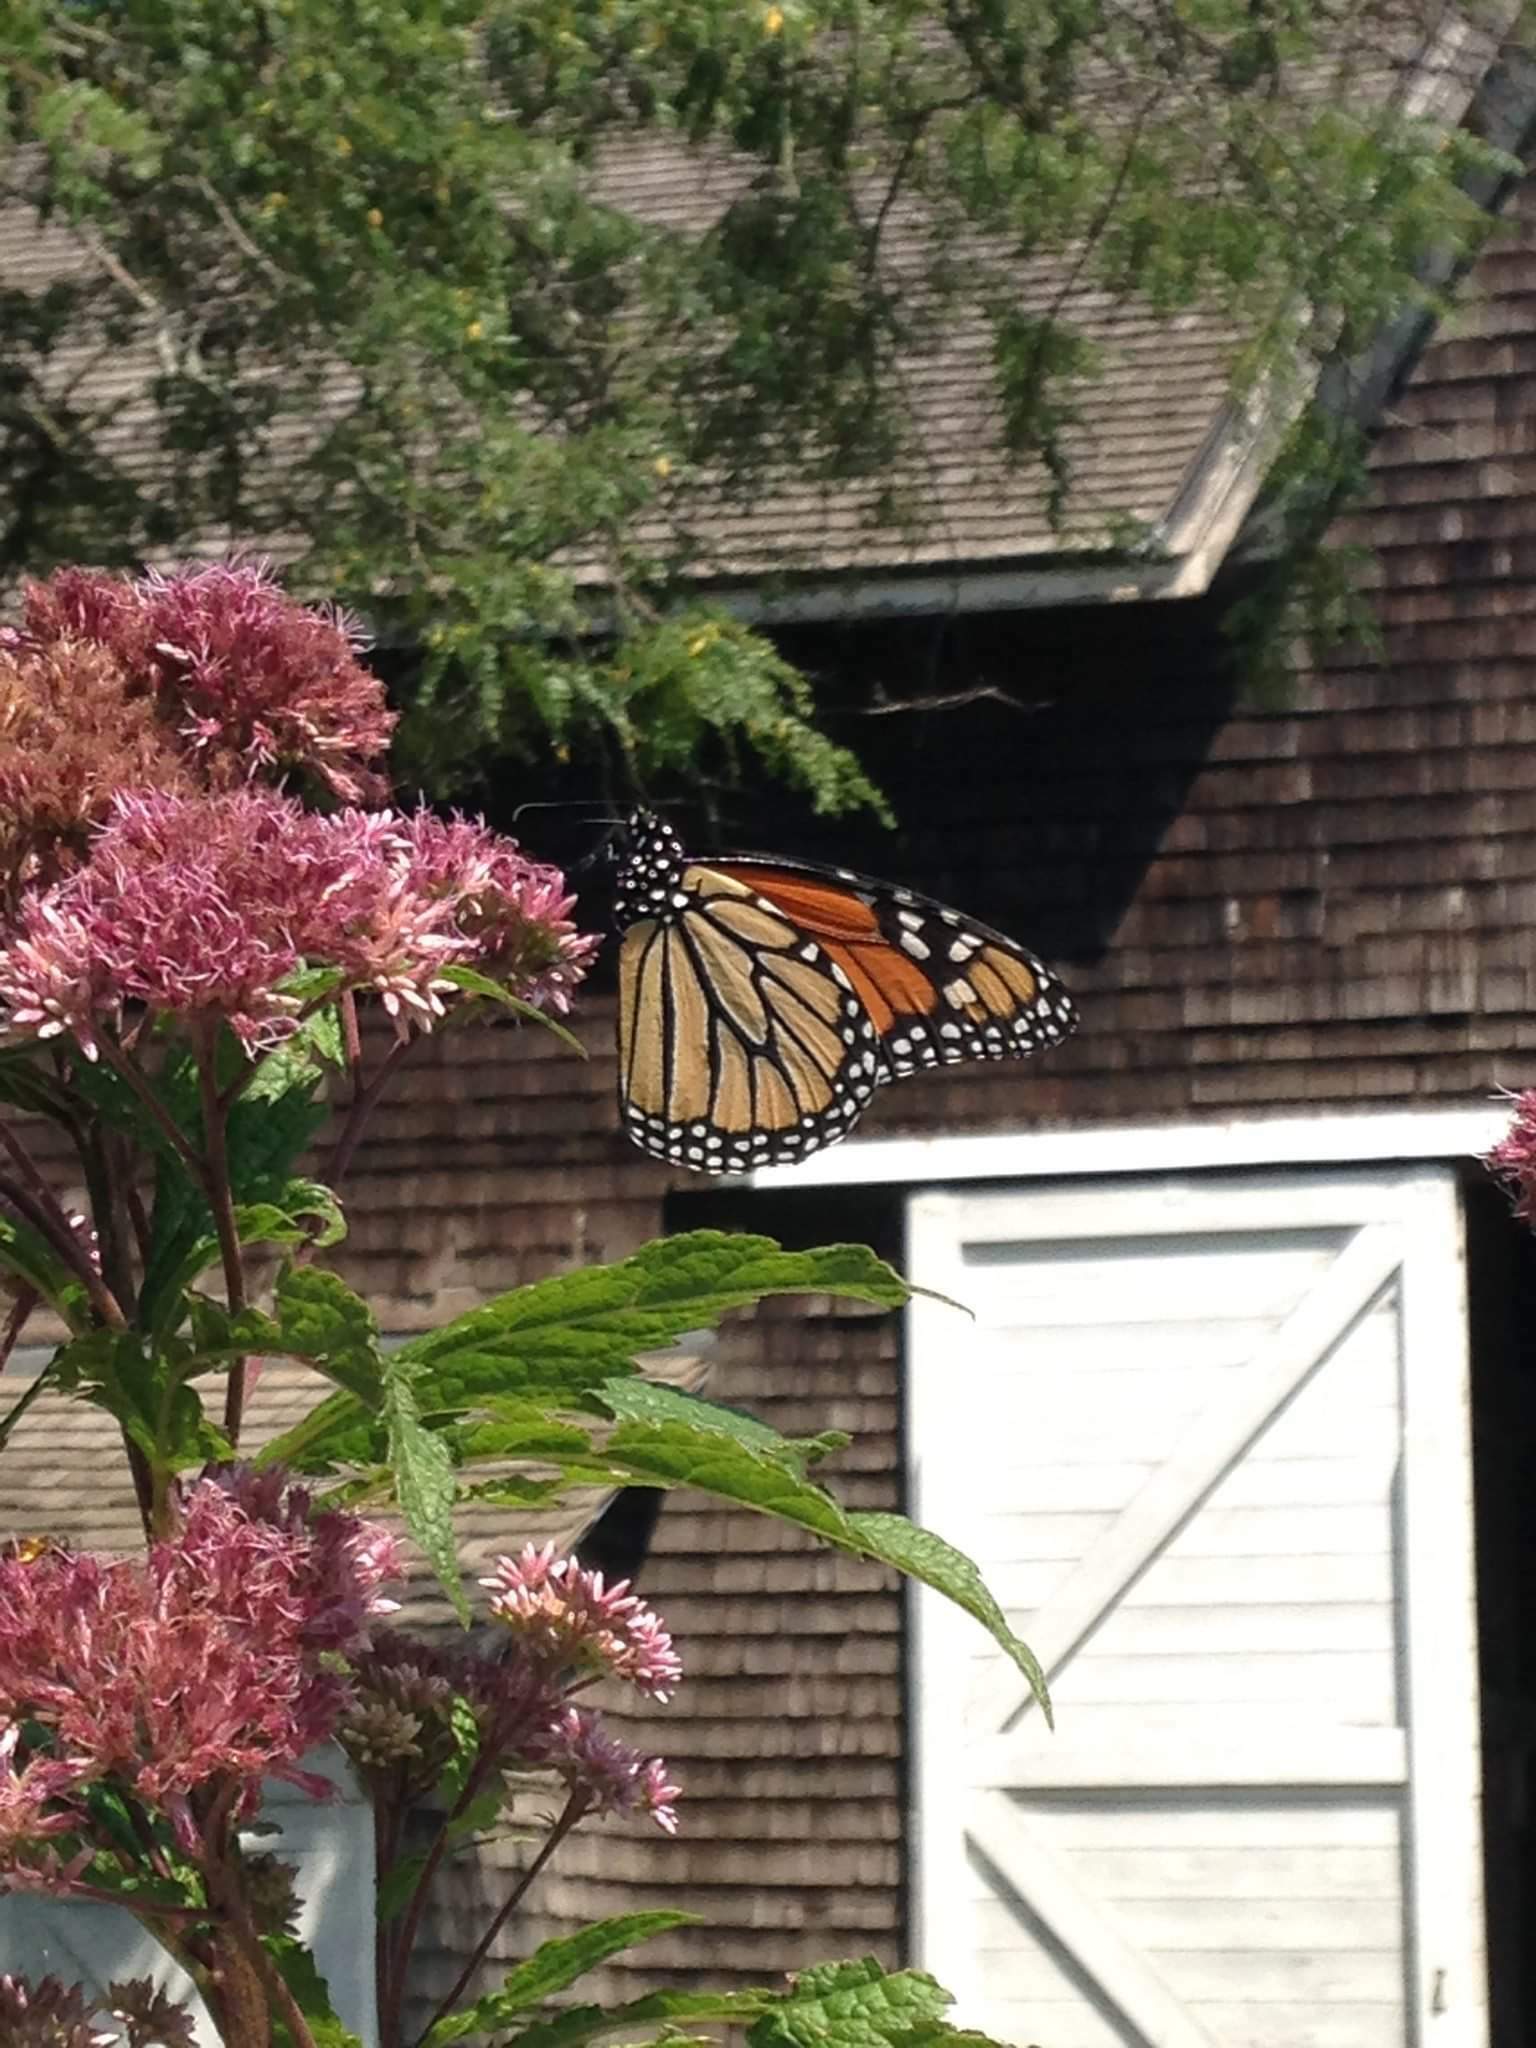 Joe Pye weed with monarch butterfly. BRIAN SMITH